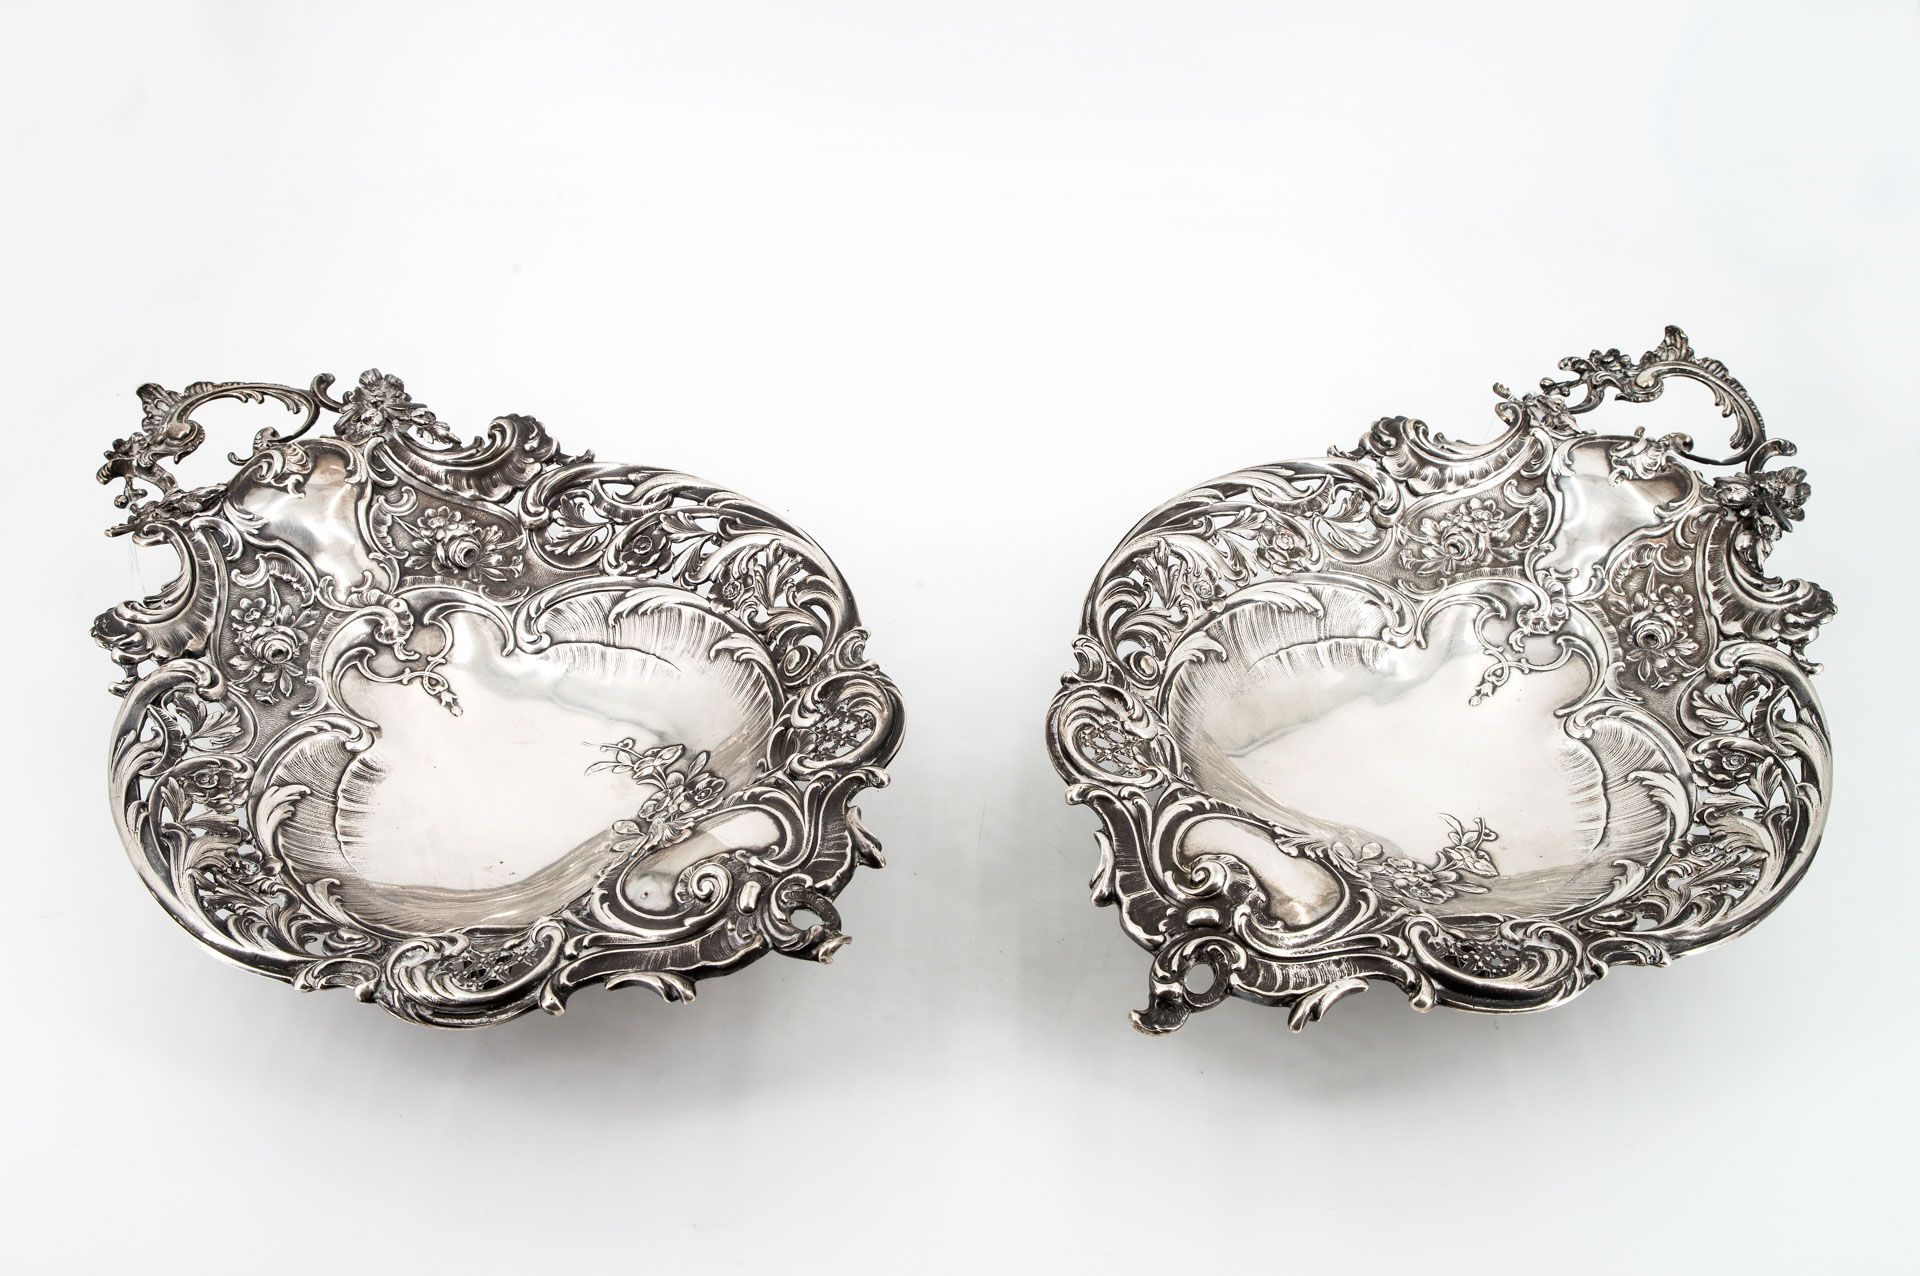 A Pair of Fine Silver Centerpieces by Peter Bruckmann & Schonne, Germany, ca 1900